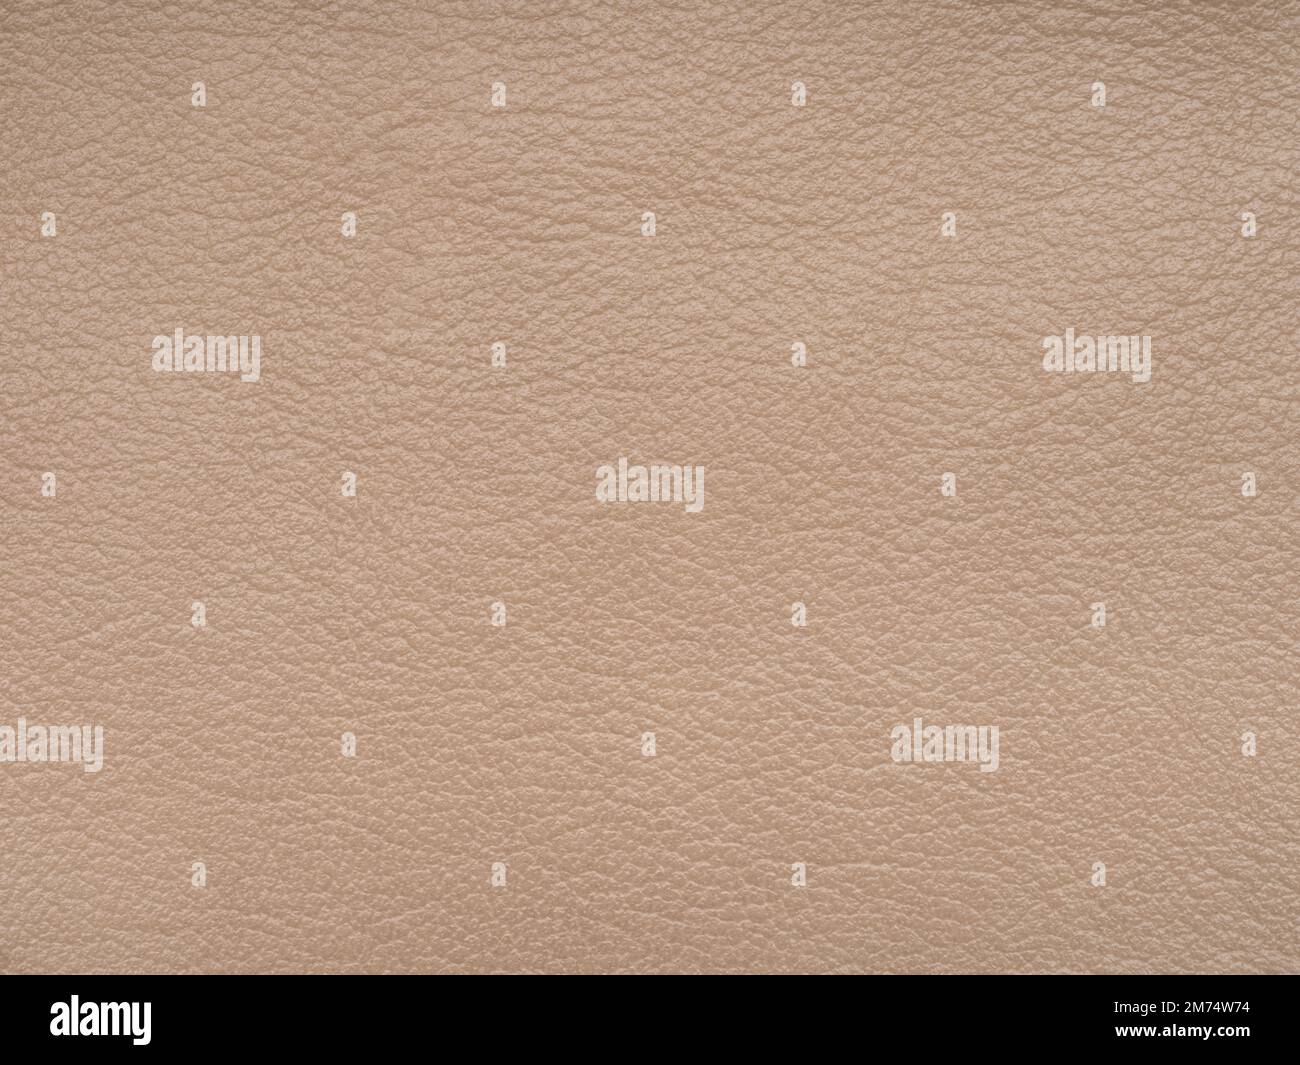 Dark beige or light brown color leather skin natural with design lines pattern or abstract background. Can use as wallpaper or backdrop luxury event Stock Photo